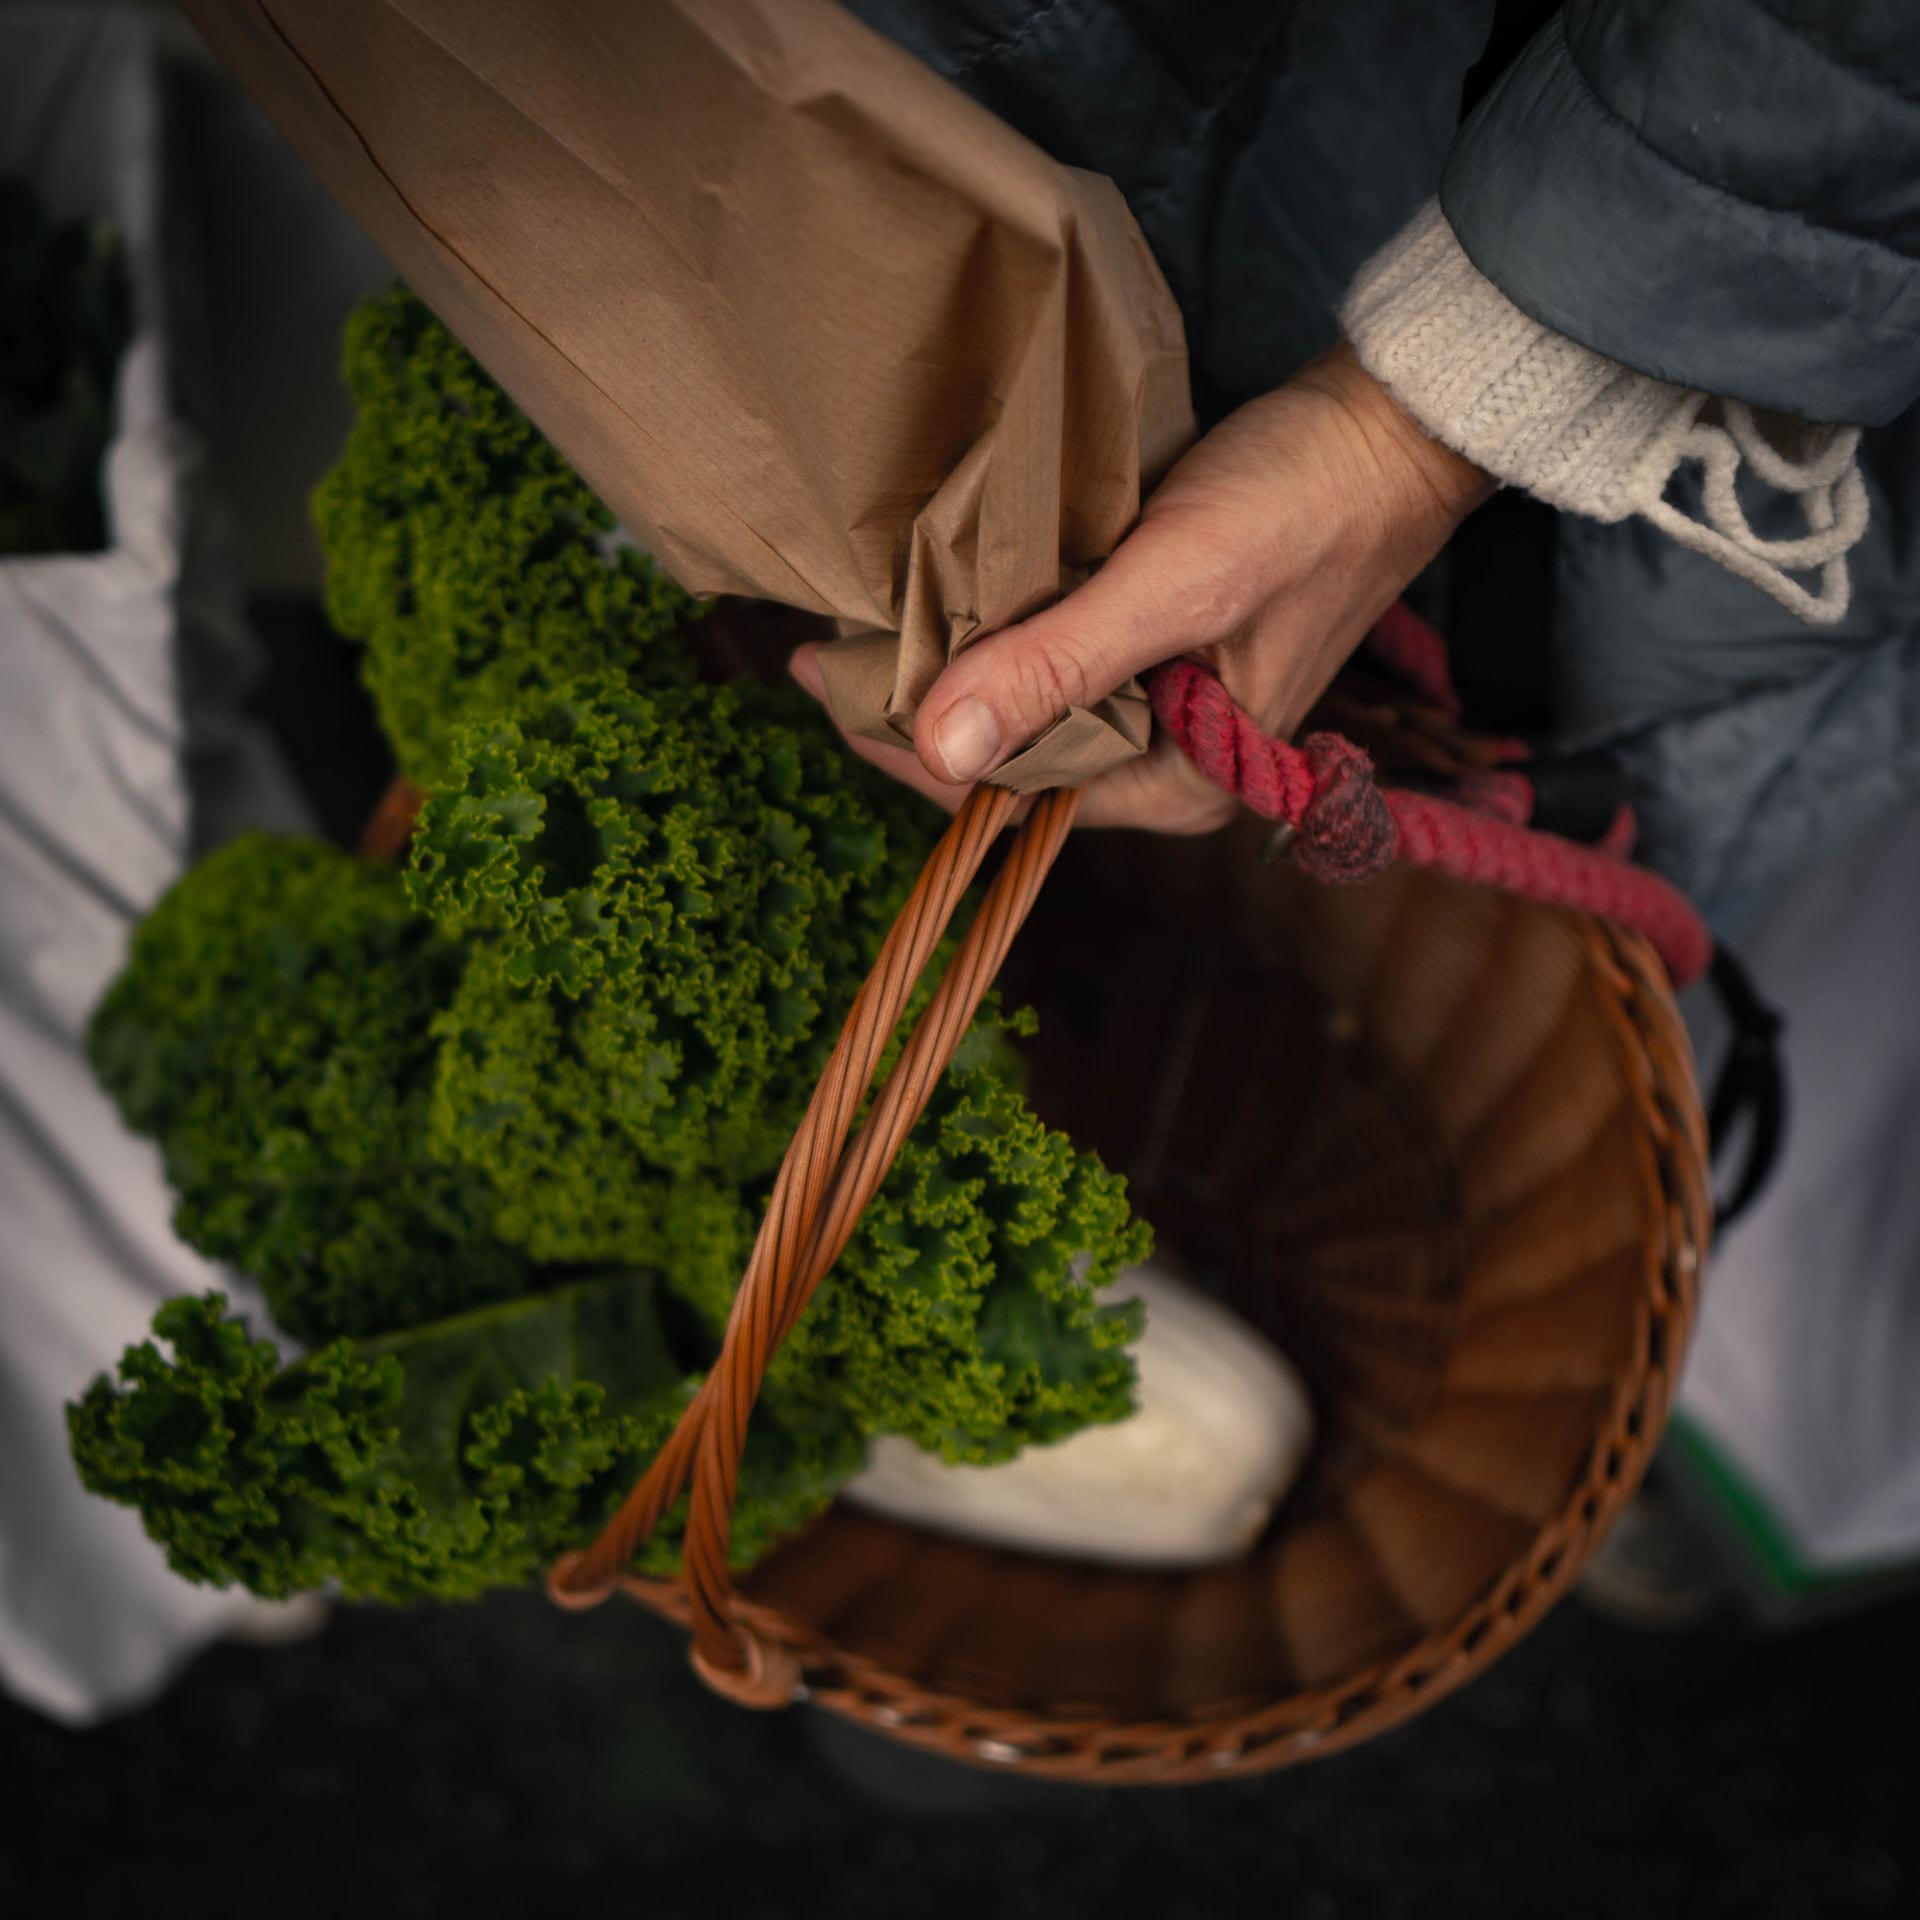 Person carrying a basket of vegetables